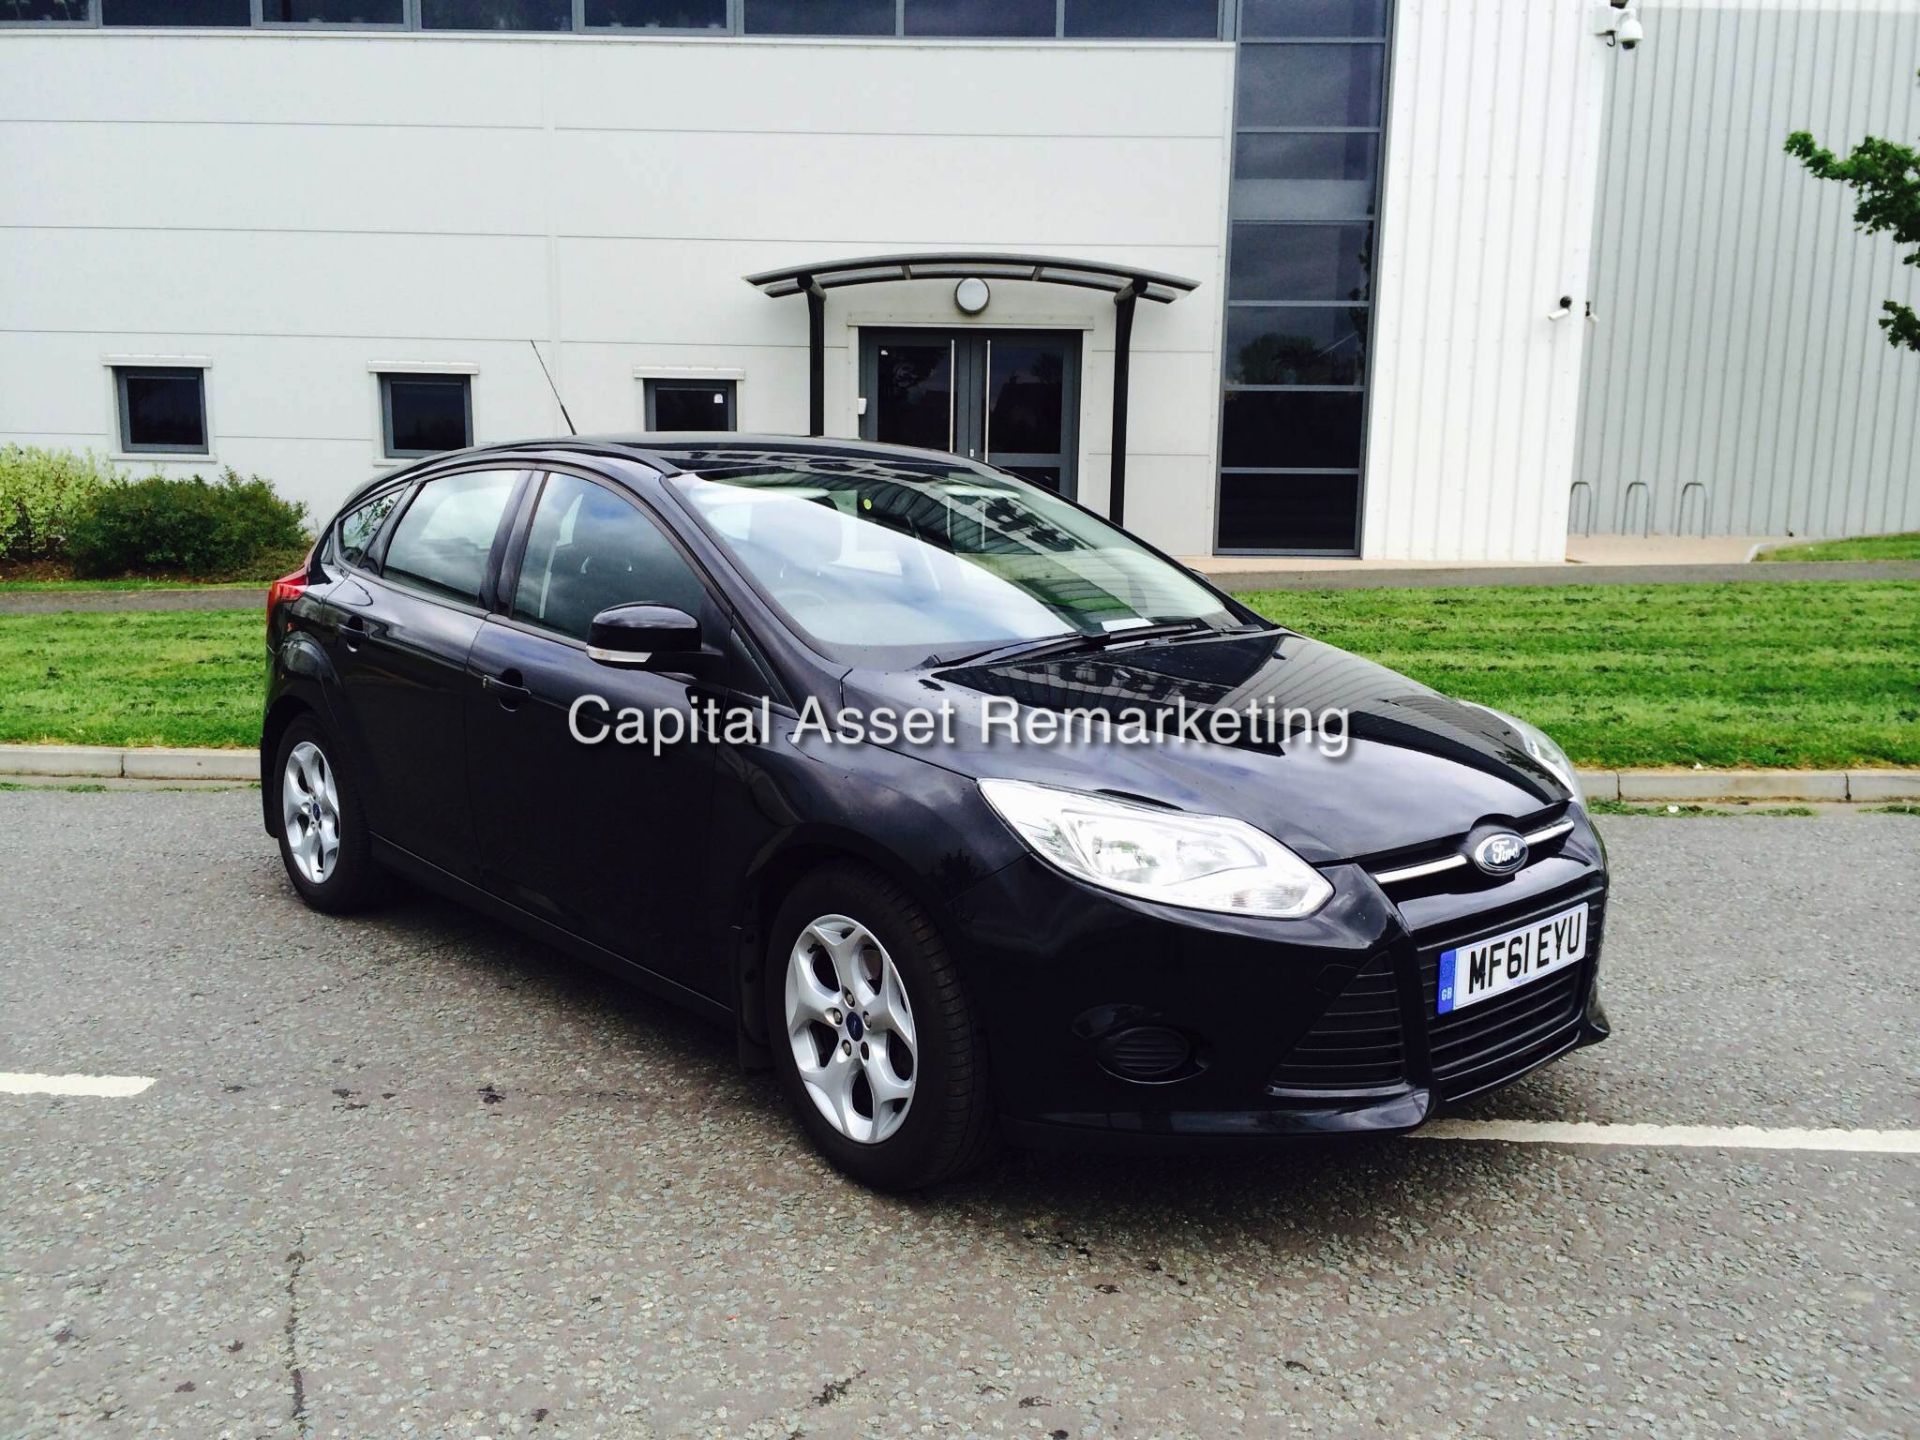 FORD FOCUS 1.6 TDCI 'EDGE' 5 DOOR HATCHBACK (2011 - 61 REG)  **1 COMPANY OWNER FROM NEW**